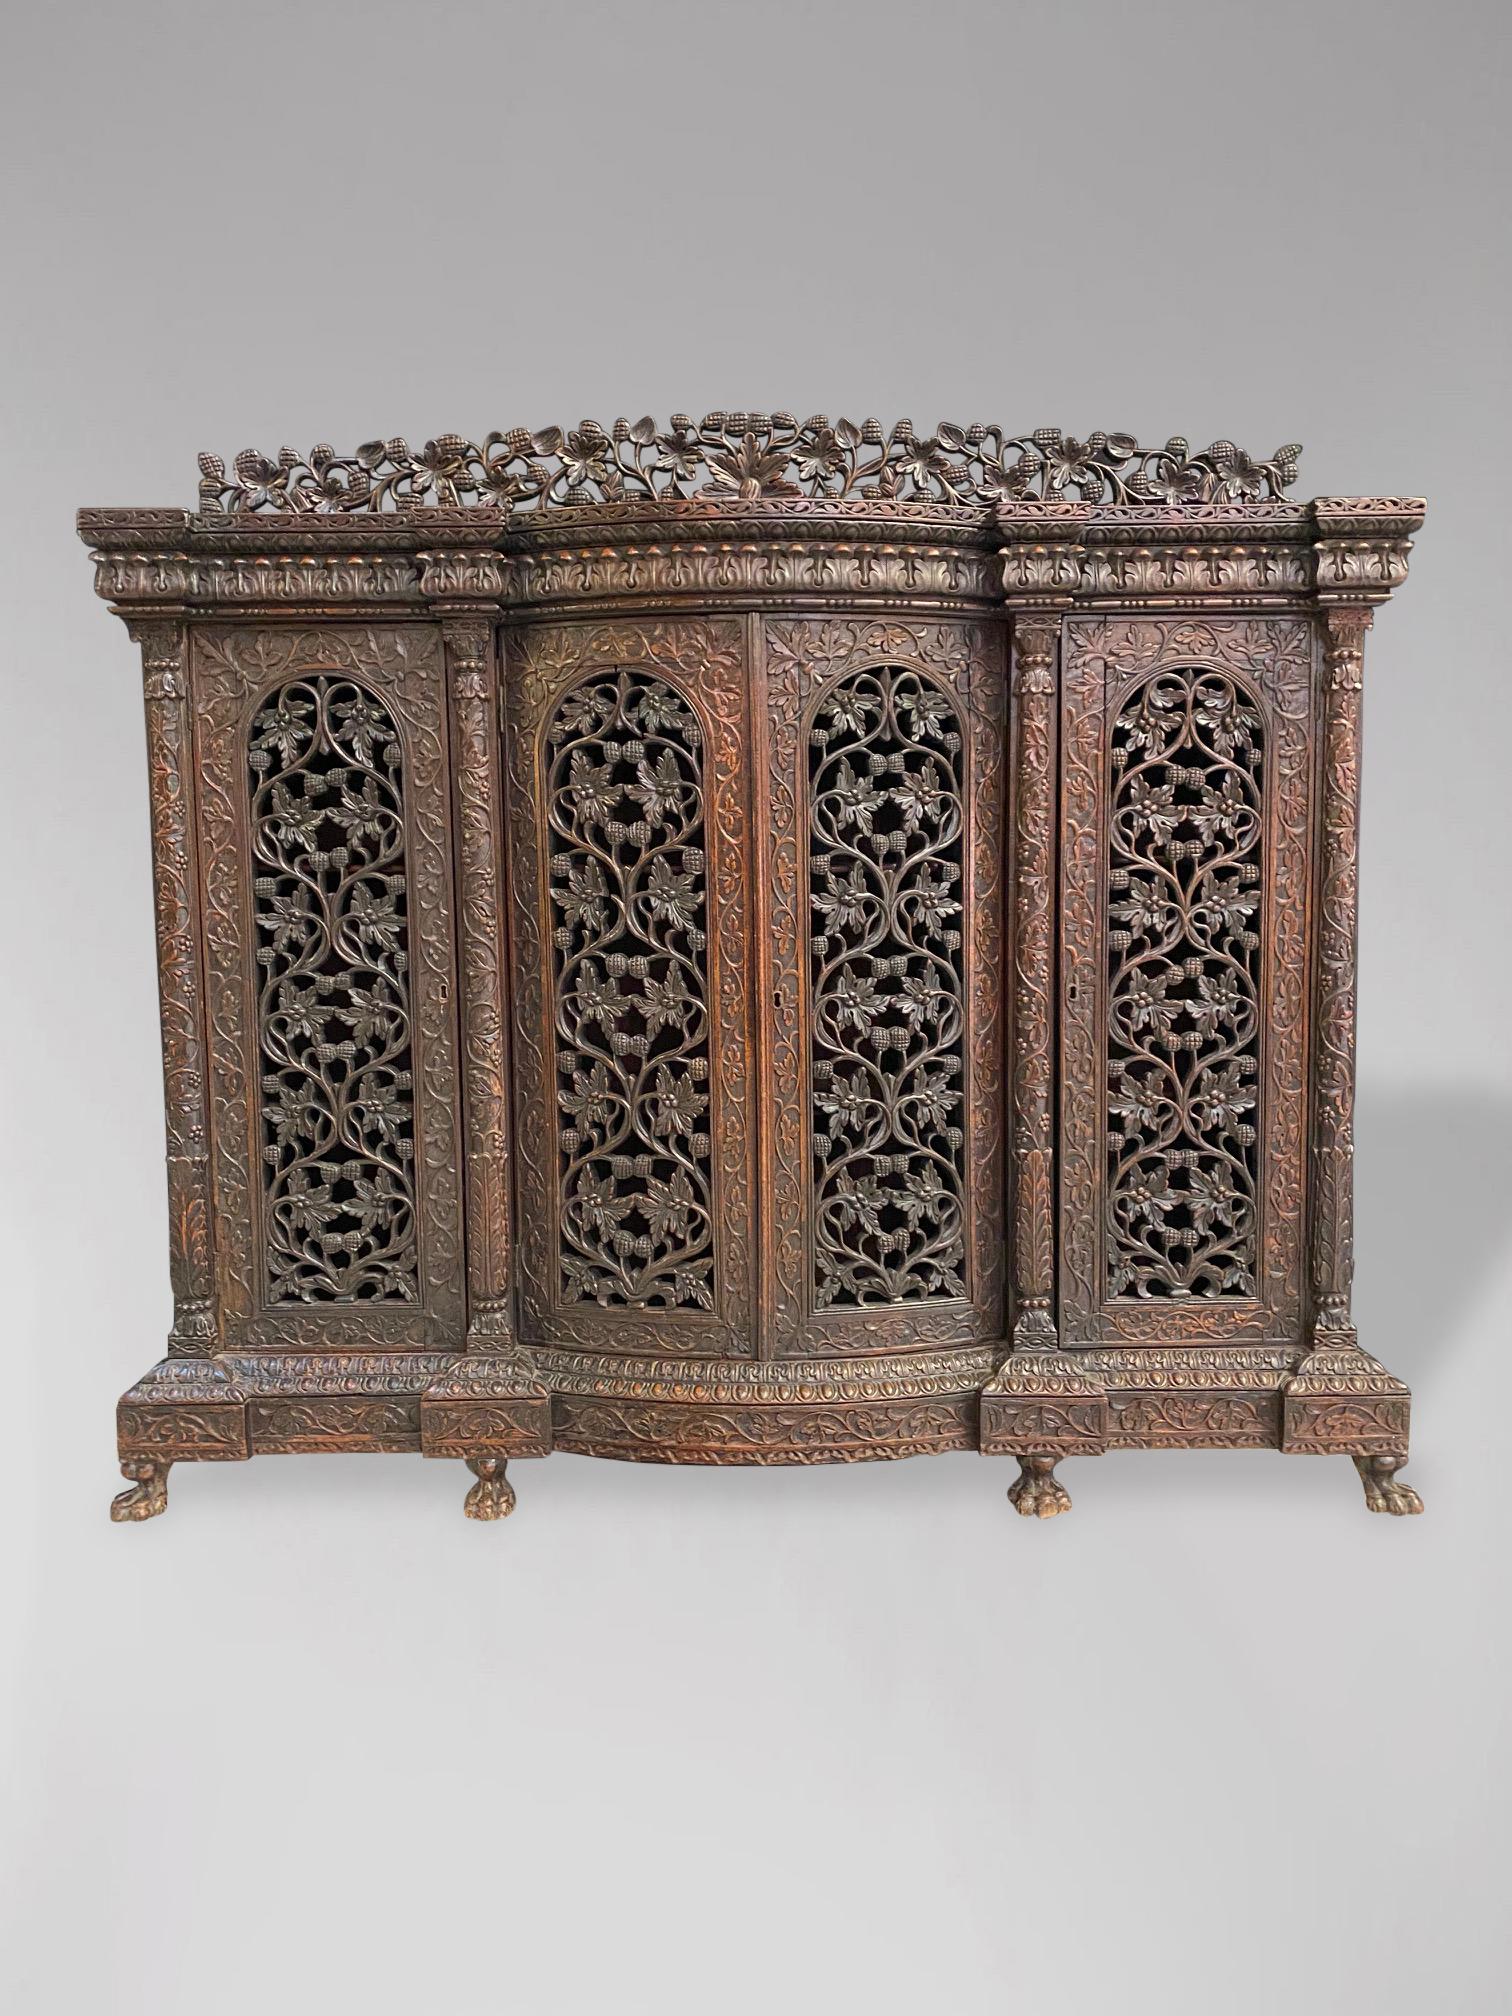 19th Century Anglo-Indian Colonial Carved Rosewood Dresser In Fair Condition In Petworth,West Sussex, GB